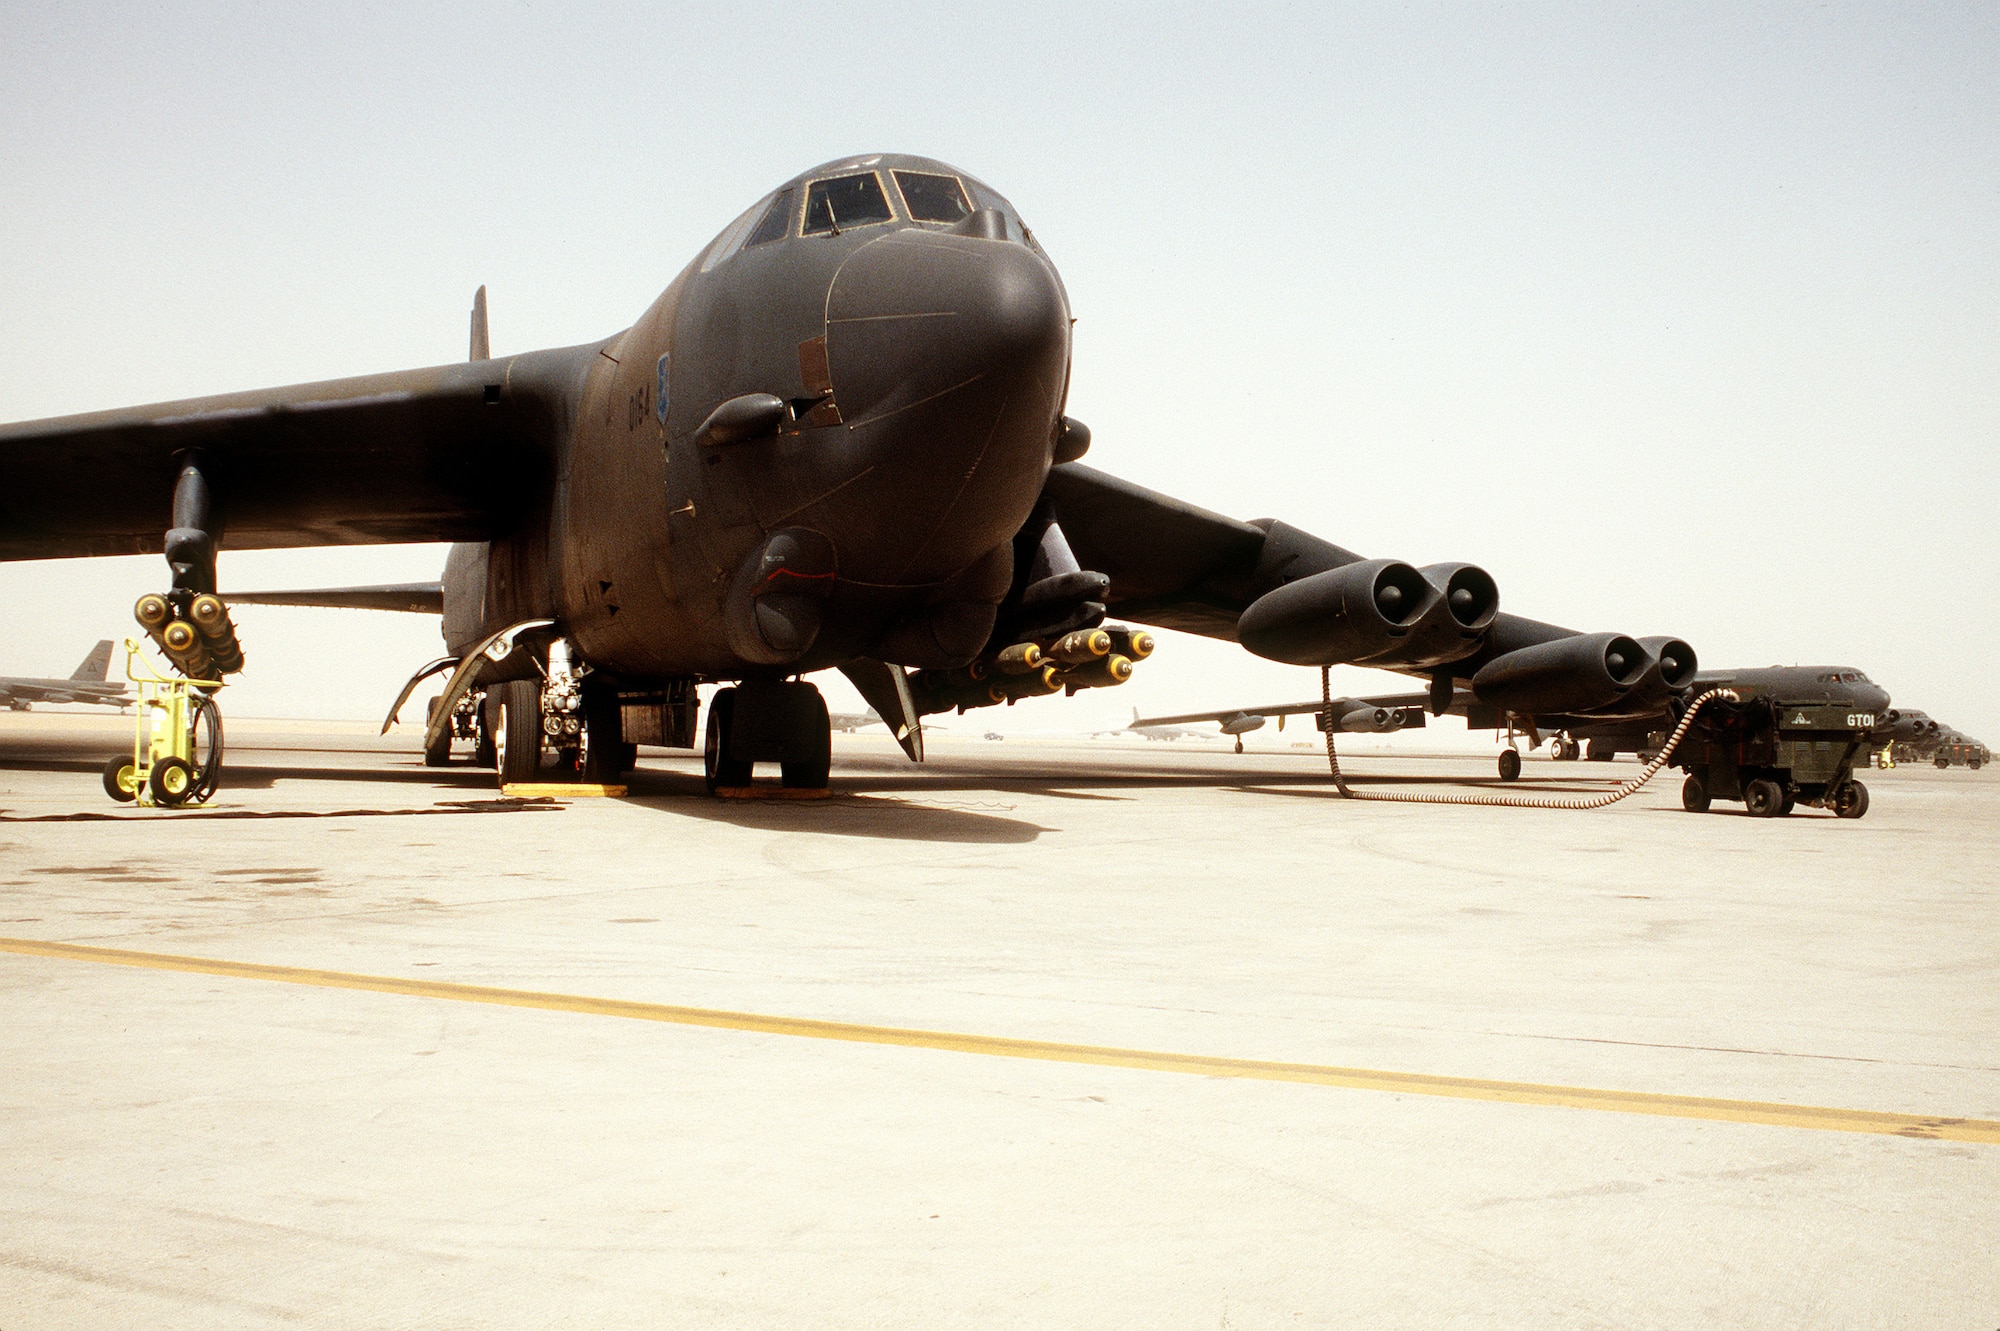 A B-52G Stratofortress aircraft is serviced on the flight line prior to flying a bombing mission against Iraqi forces during Operation Desert Storm. The aircraft is armed with M-117 750-pound bombs.